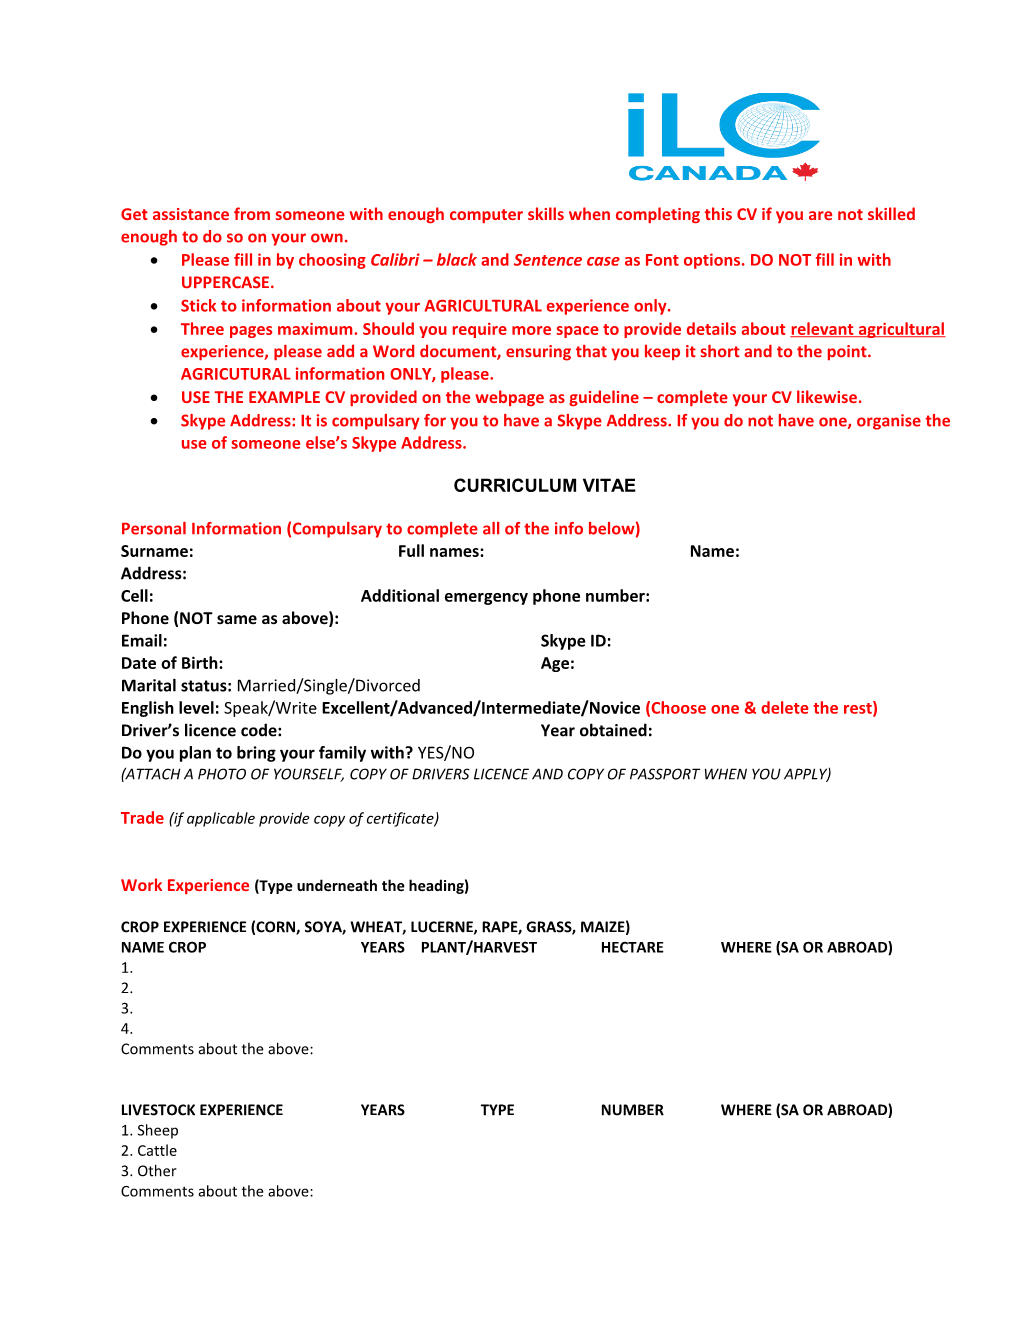 Get Assistance from Someone with Enough Computer Skills Whencompleting This CV If You